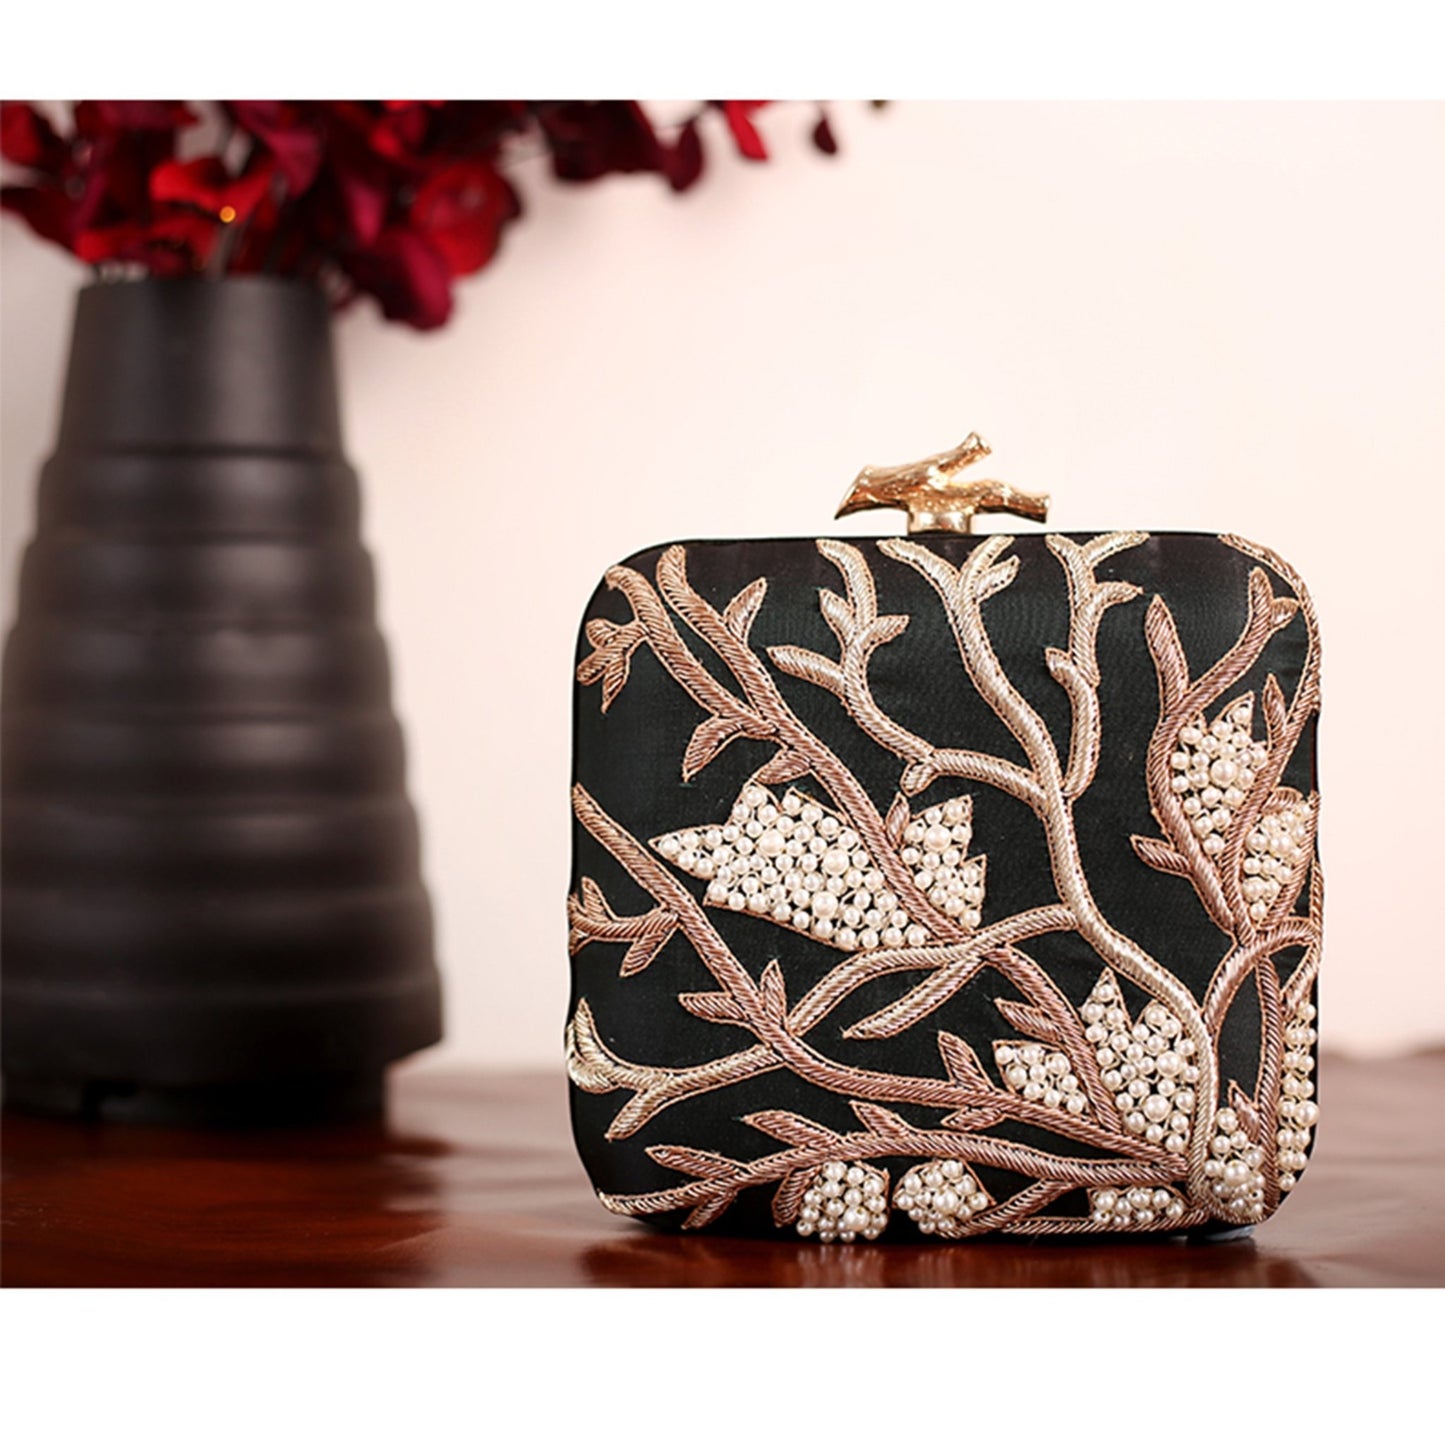 Angeline's Handcrafted Clutch Bag with Root design